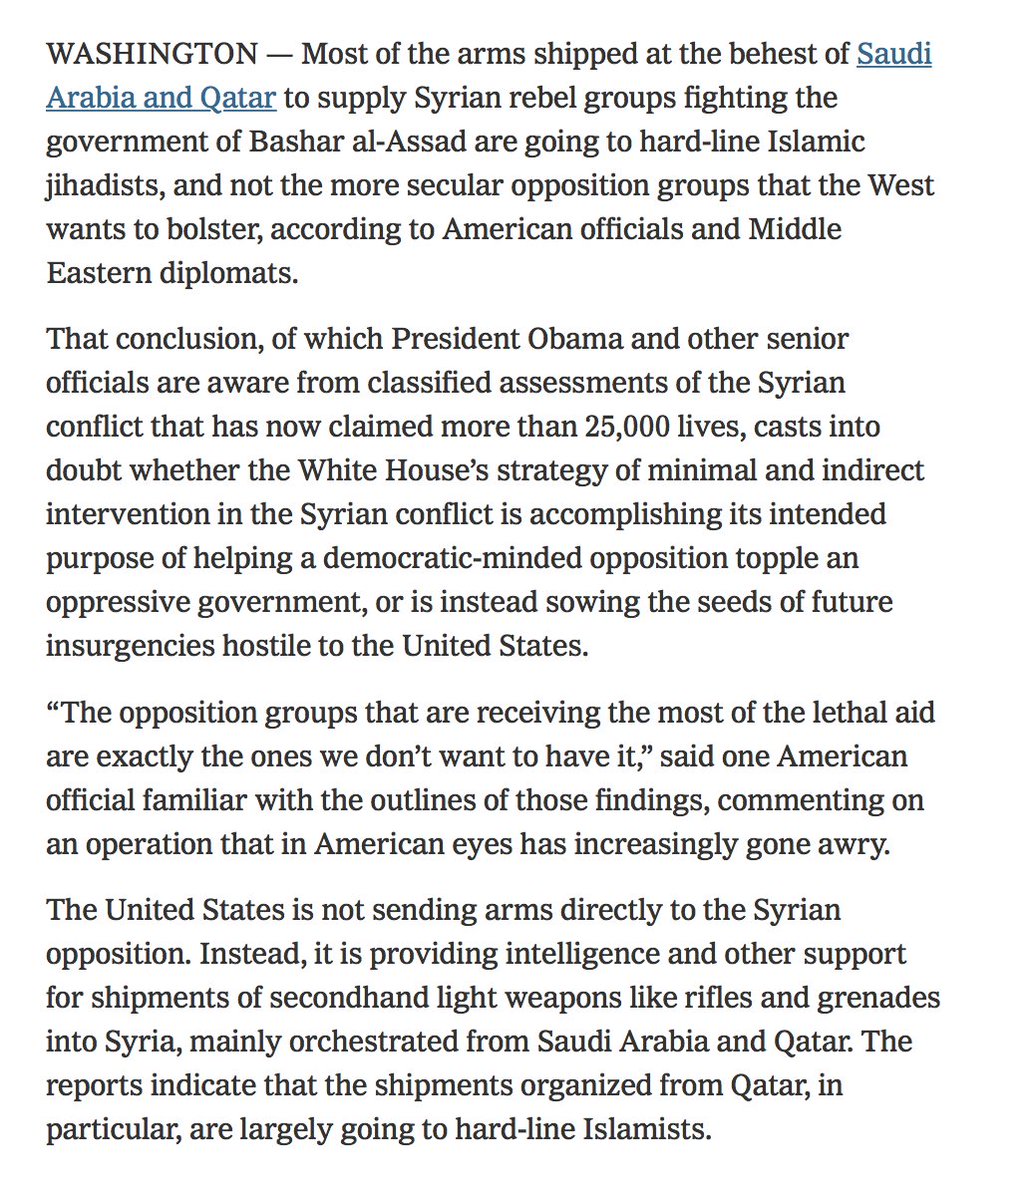 In October 2012, the New York Times reported the US supported Saudi Arabia and Qatar as they sent rifles and grenades to Syrian "opposition groups." They largely went to "hard-line Islamic jihadists." Blinken likely knew this fact yet he still championed arming the "rebels."